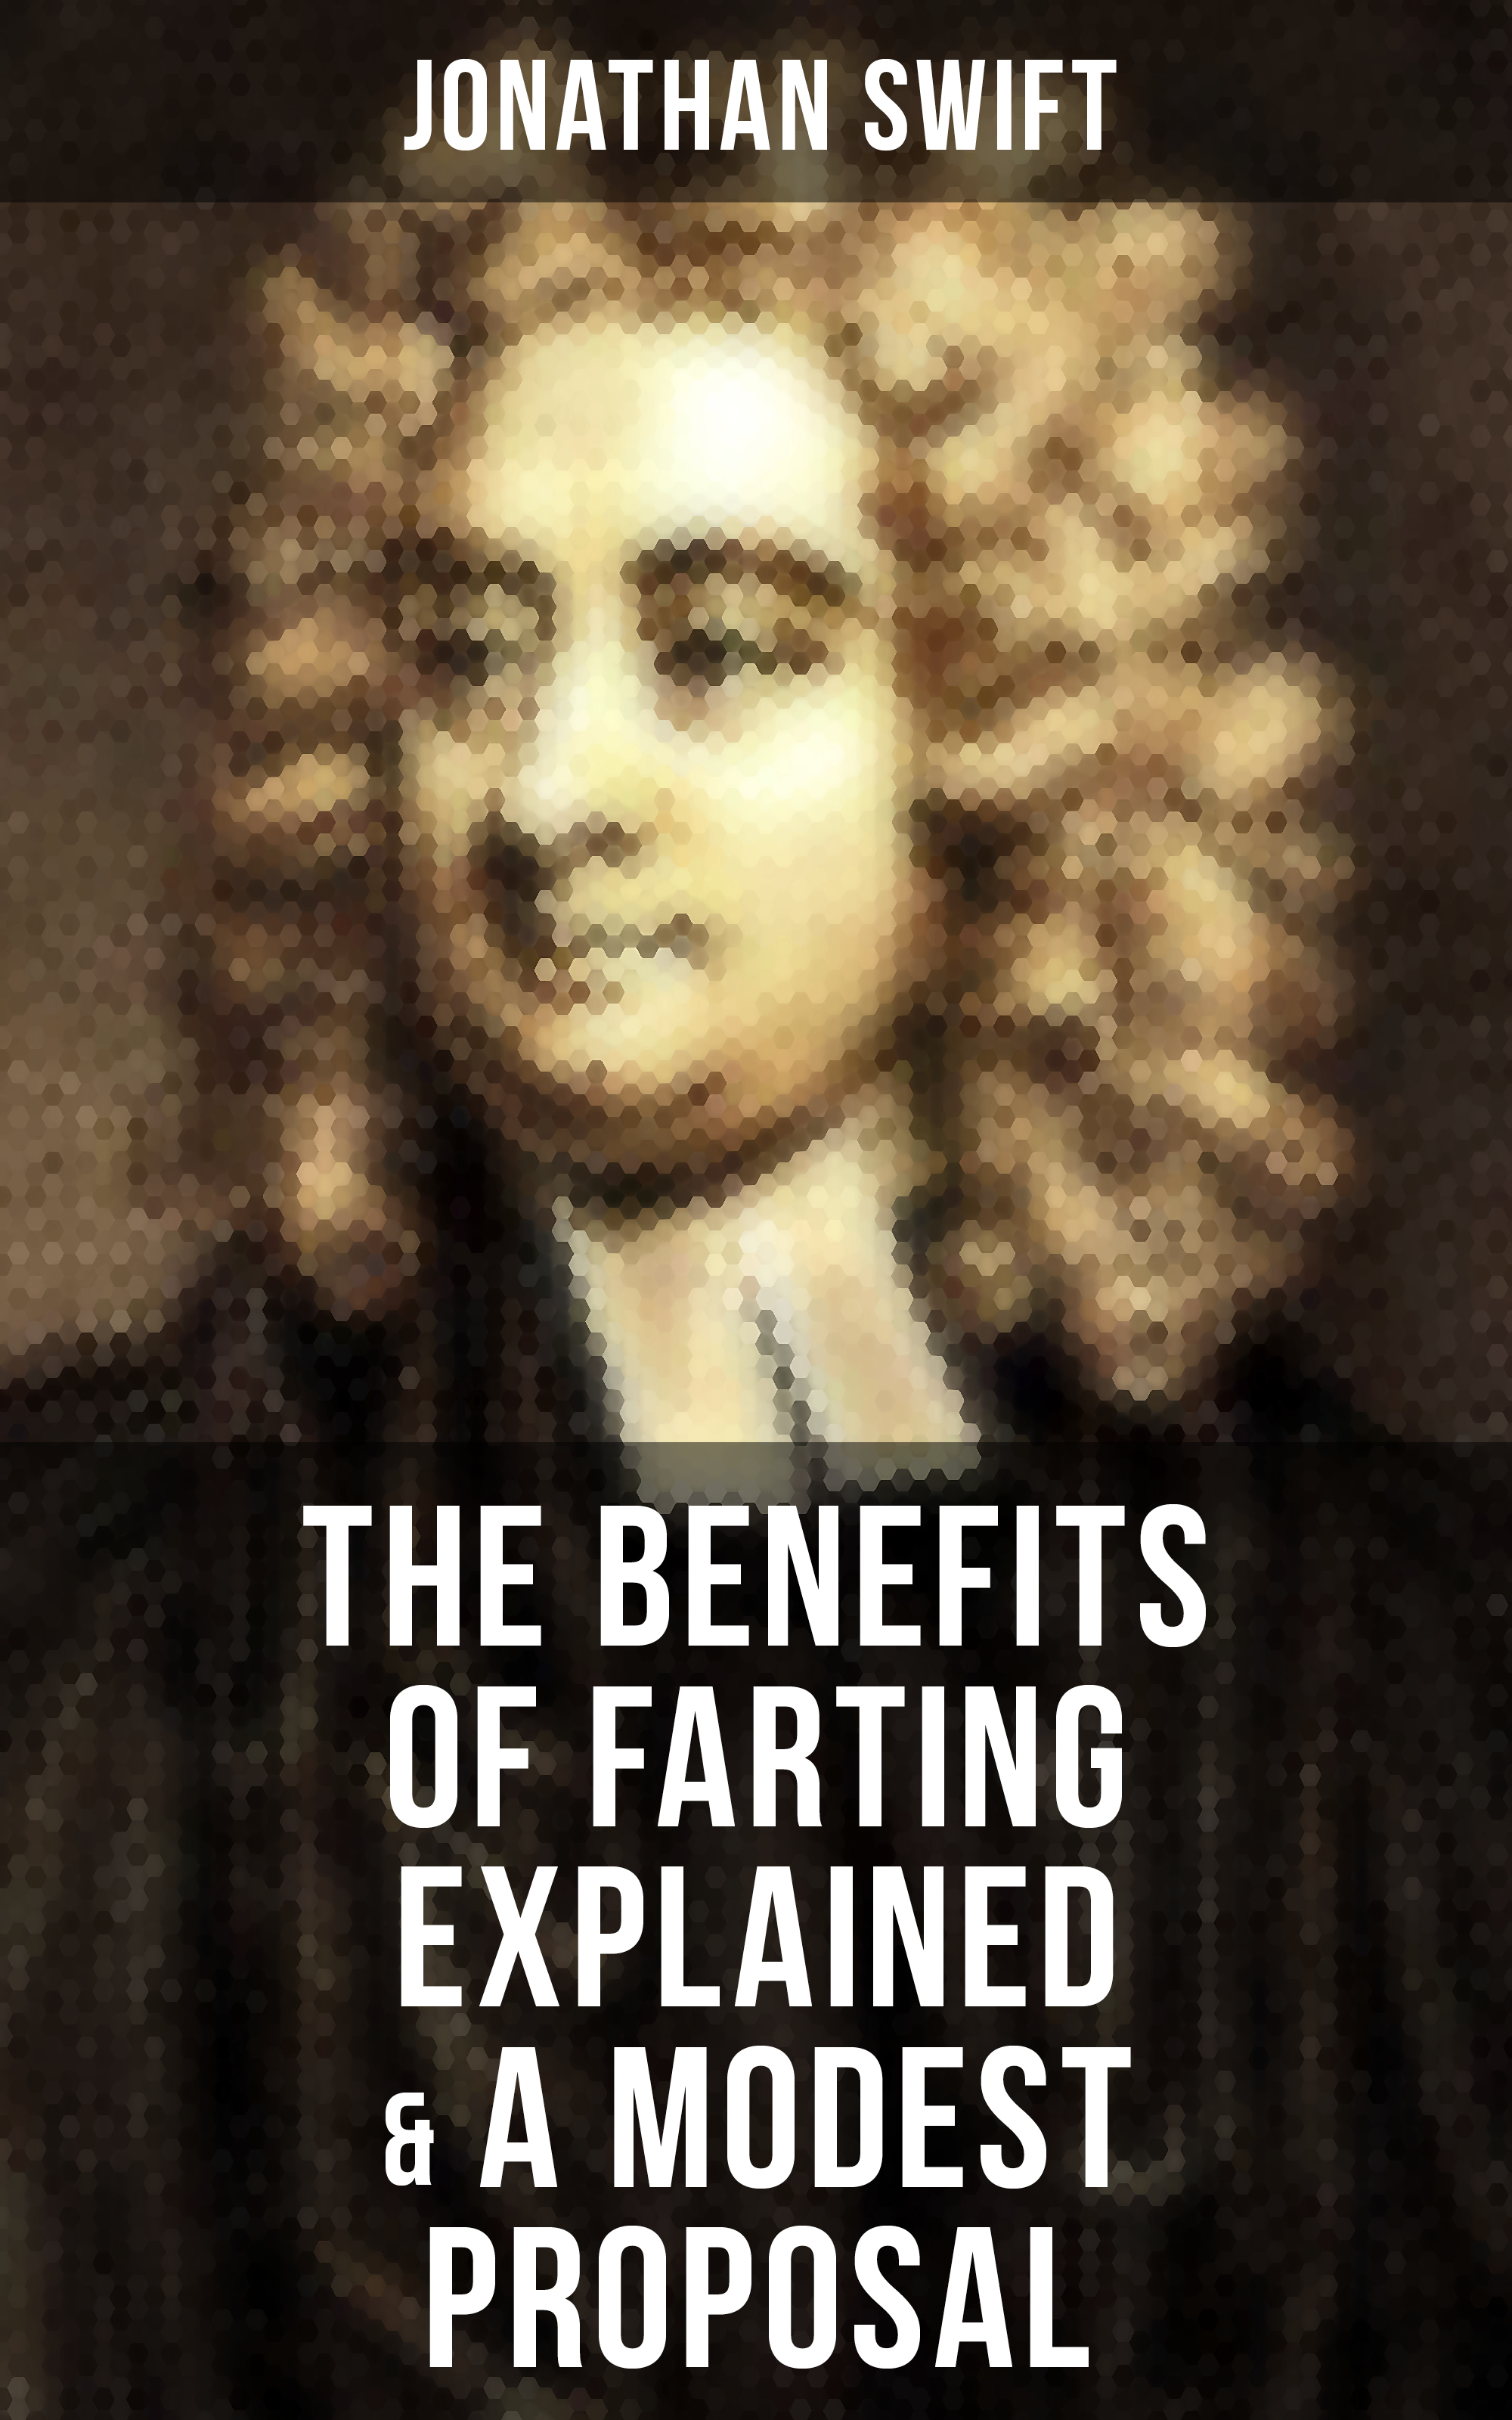 Скачать The Benefits of Farting Explained & A Modest Proposal - Джонатан Свифт